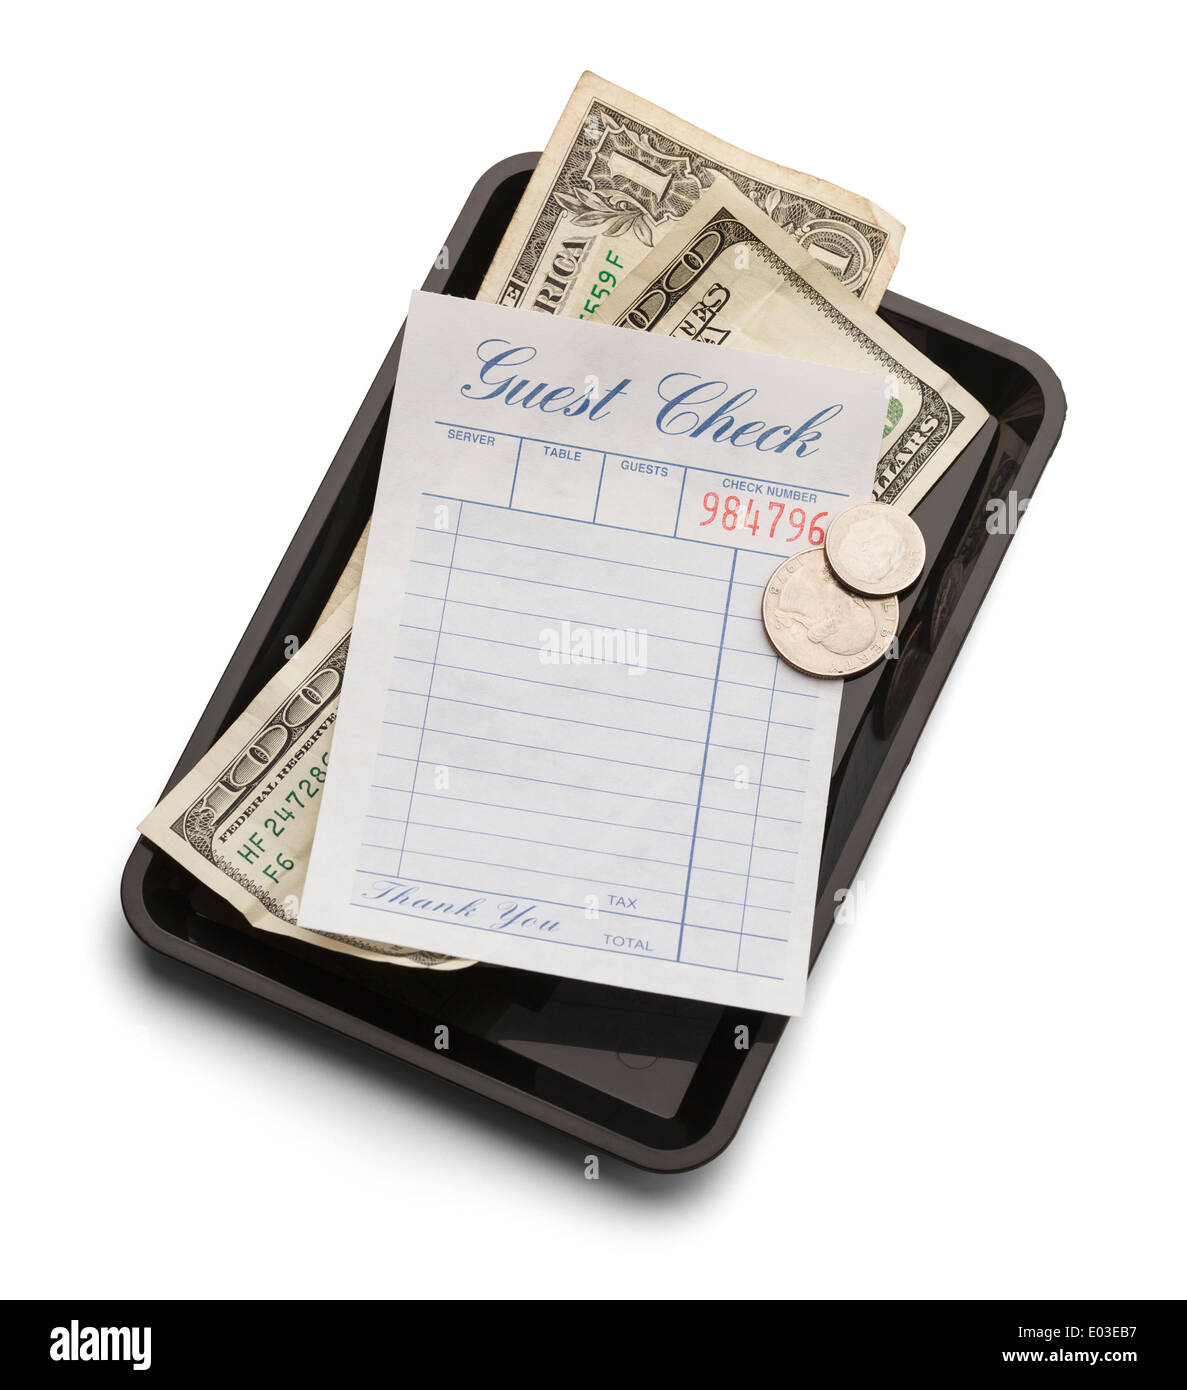 Restaurant bill with money on payment tray isolated on a white background. Stock Photo